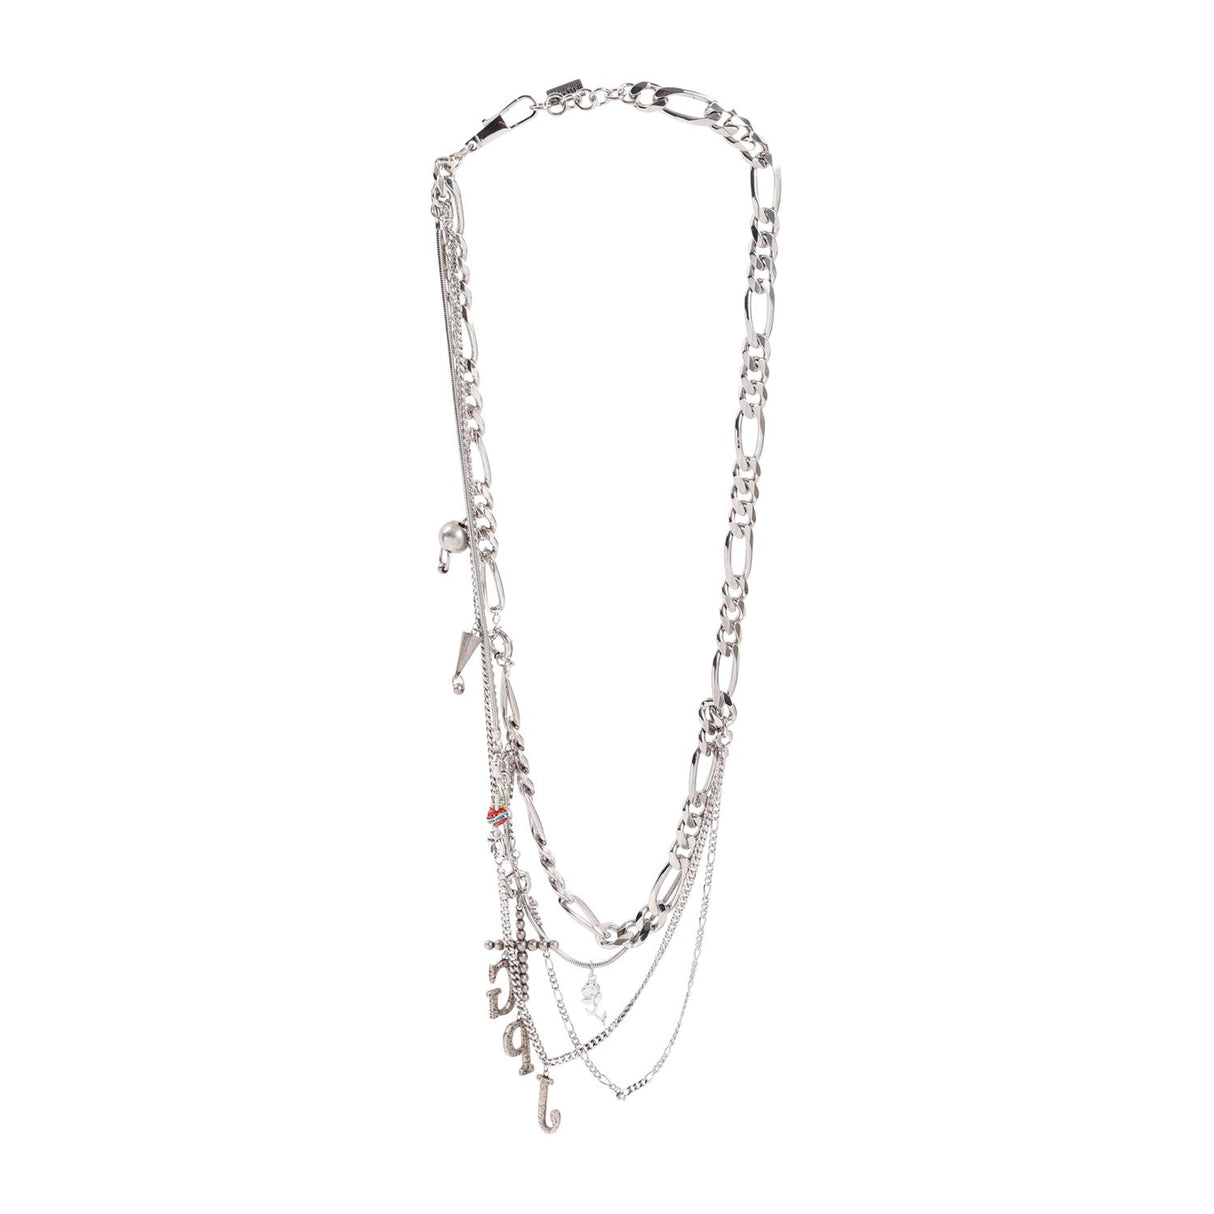 JEAN PAUL GAULTIER Multi-Chain and Charms Necklace for Women in Silver